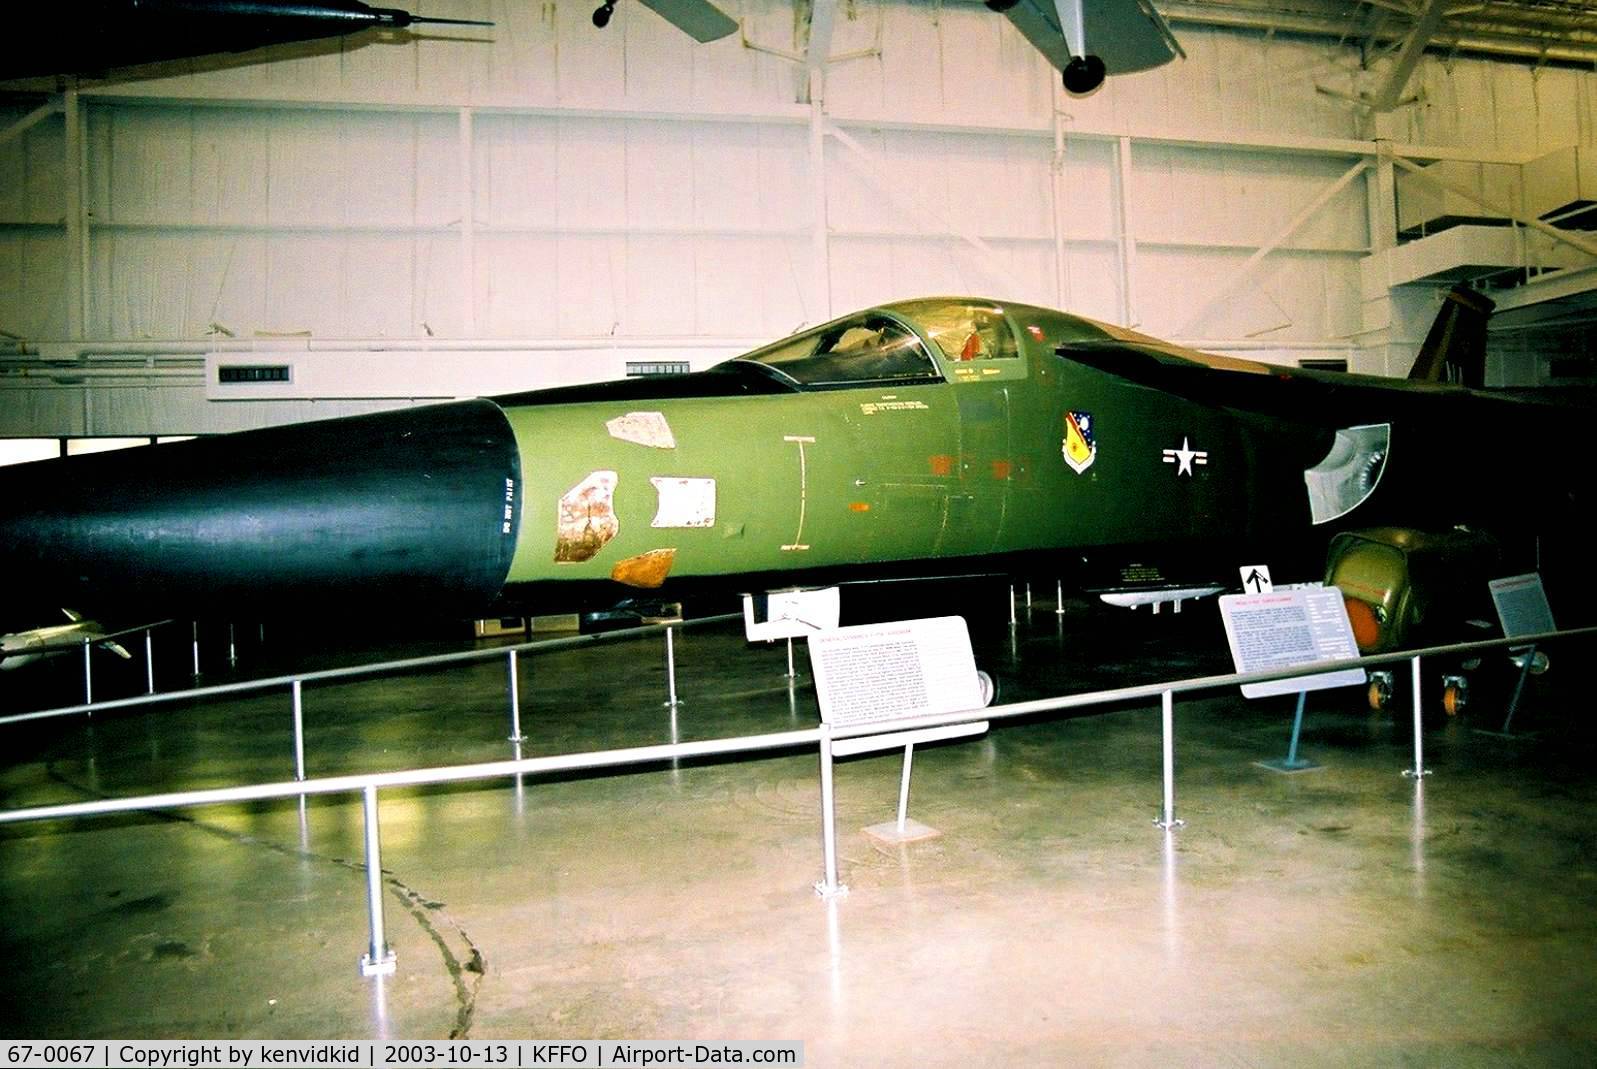 67-0067, 1967 General Dynamics F-111A Aardvark C/N A1-112, At the Museum of the United States Air Force Dayton Ohio.